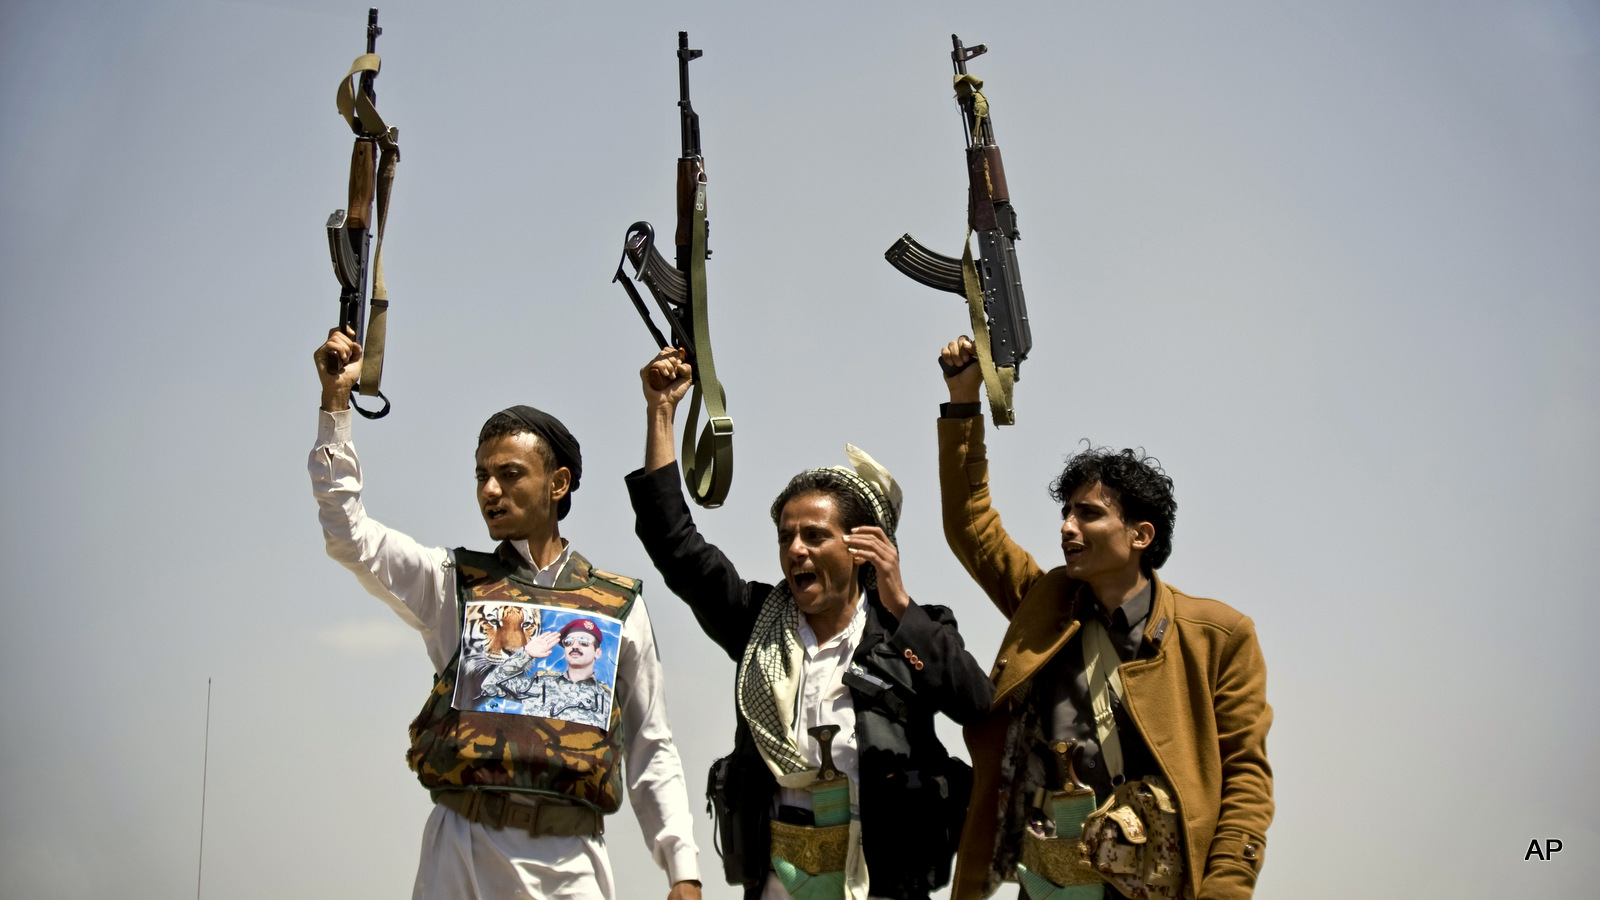 Supporters of Ahmed Ali Abdullah Saleh, the son of Yemeni former President Ali Abdullah Saleh, hold their weapons as they chant slogans during a demonstration demanding presidential elections be held and the younger Saleh run for the office, in Sanaa, Yemen.